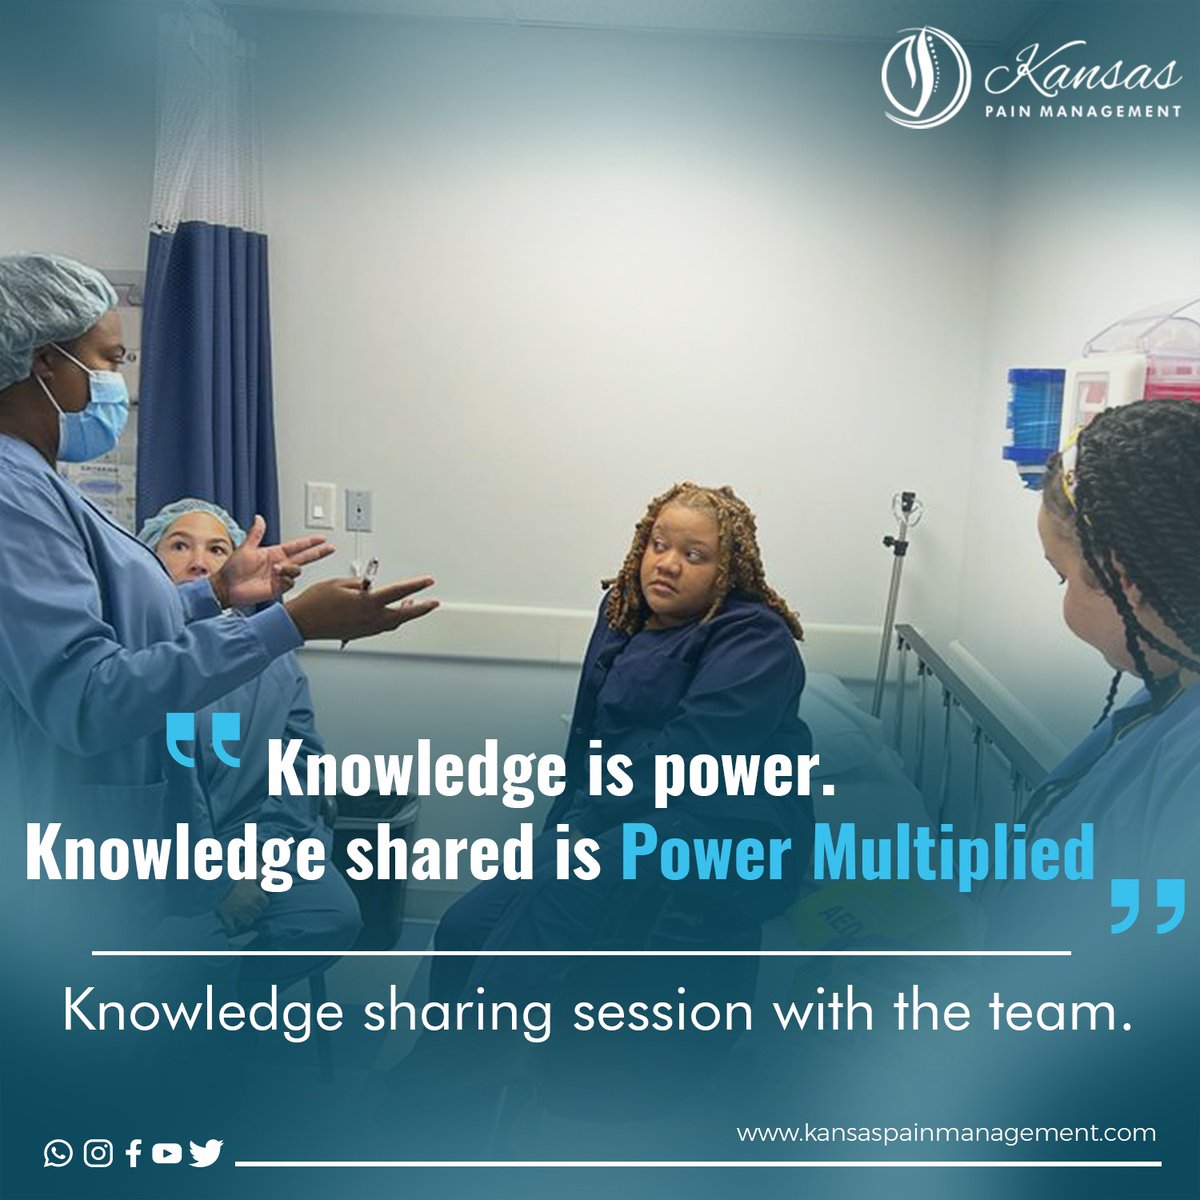 We at Kansas Pain Management believe in learning and growing together. 
' Knowledge is power.
Knowledge shared is Power Multiplied.'
Knowledge sharing session with the team are regular events at #KansasPainManagement
because #SharingisCaring
#Patientwellbeing #PatientTreatment